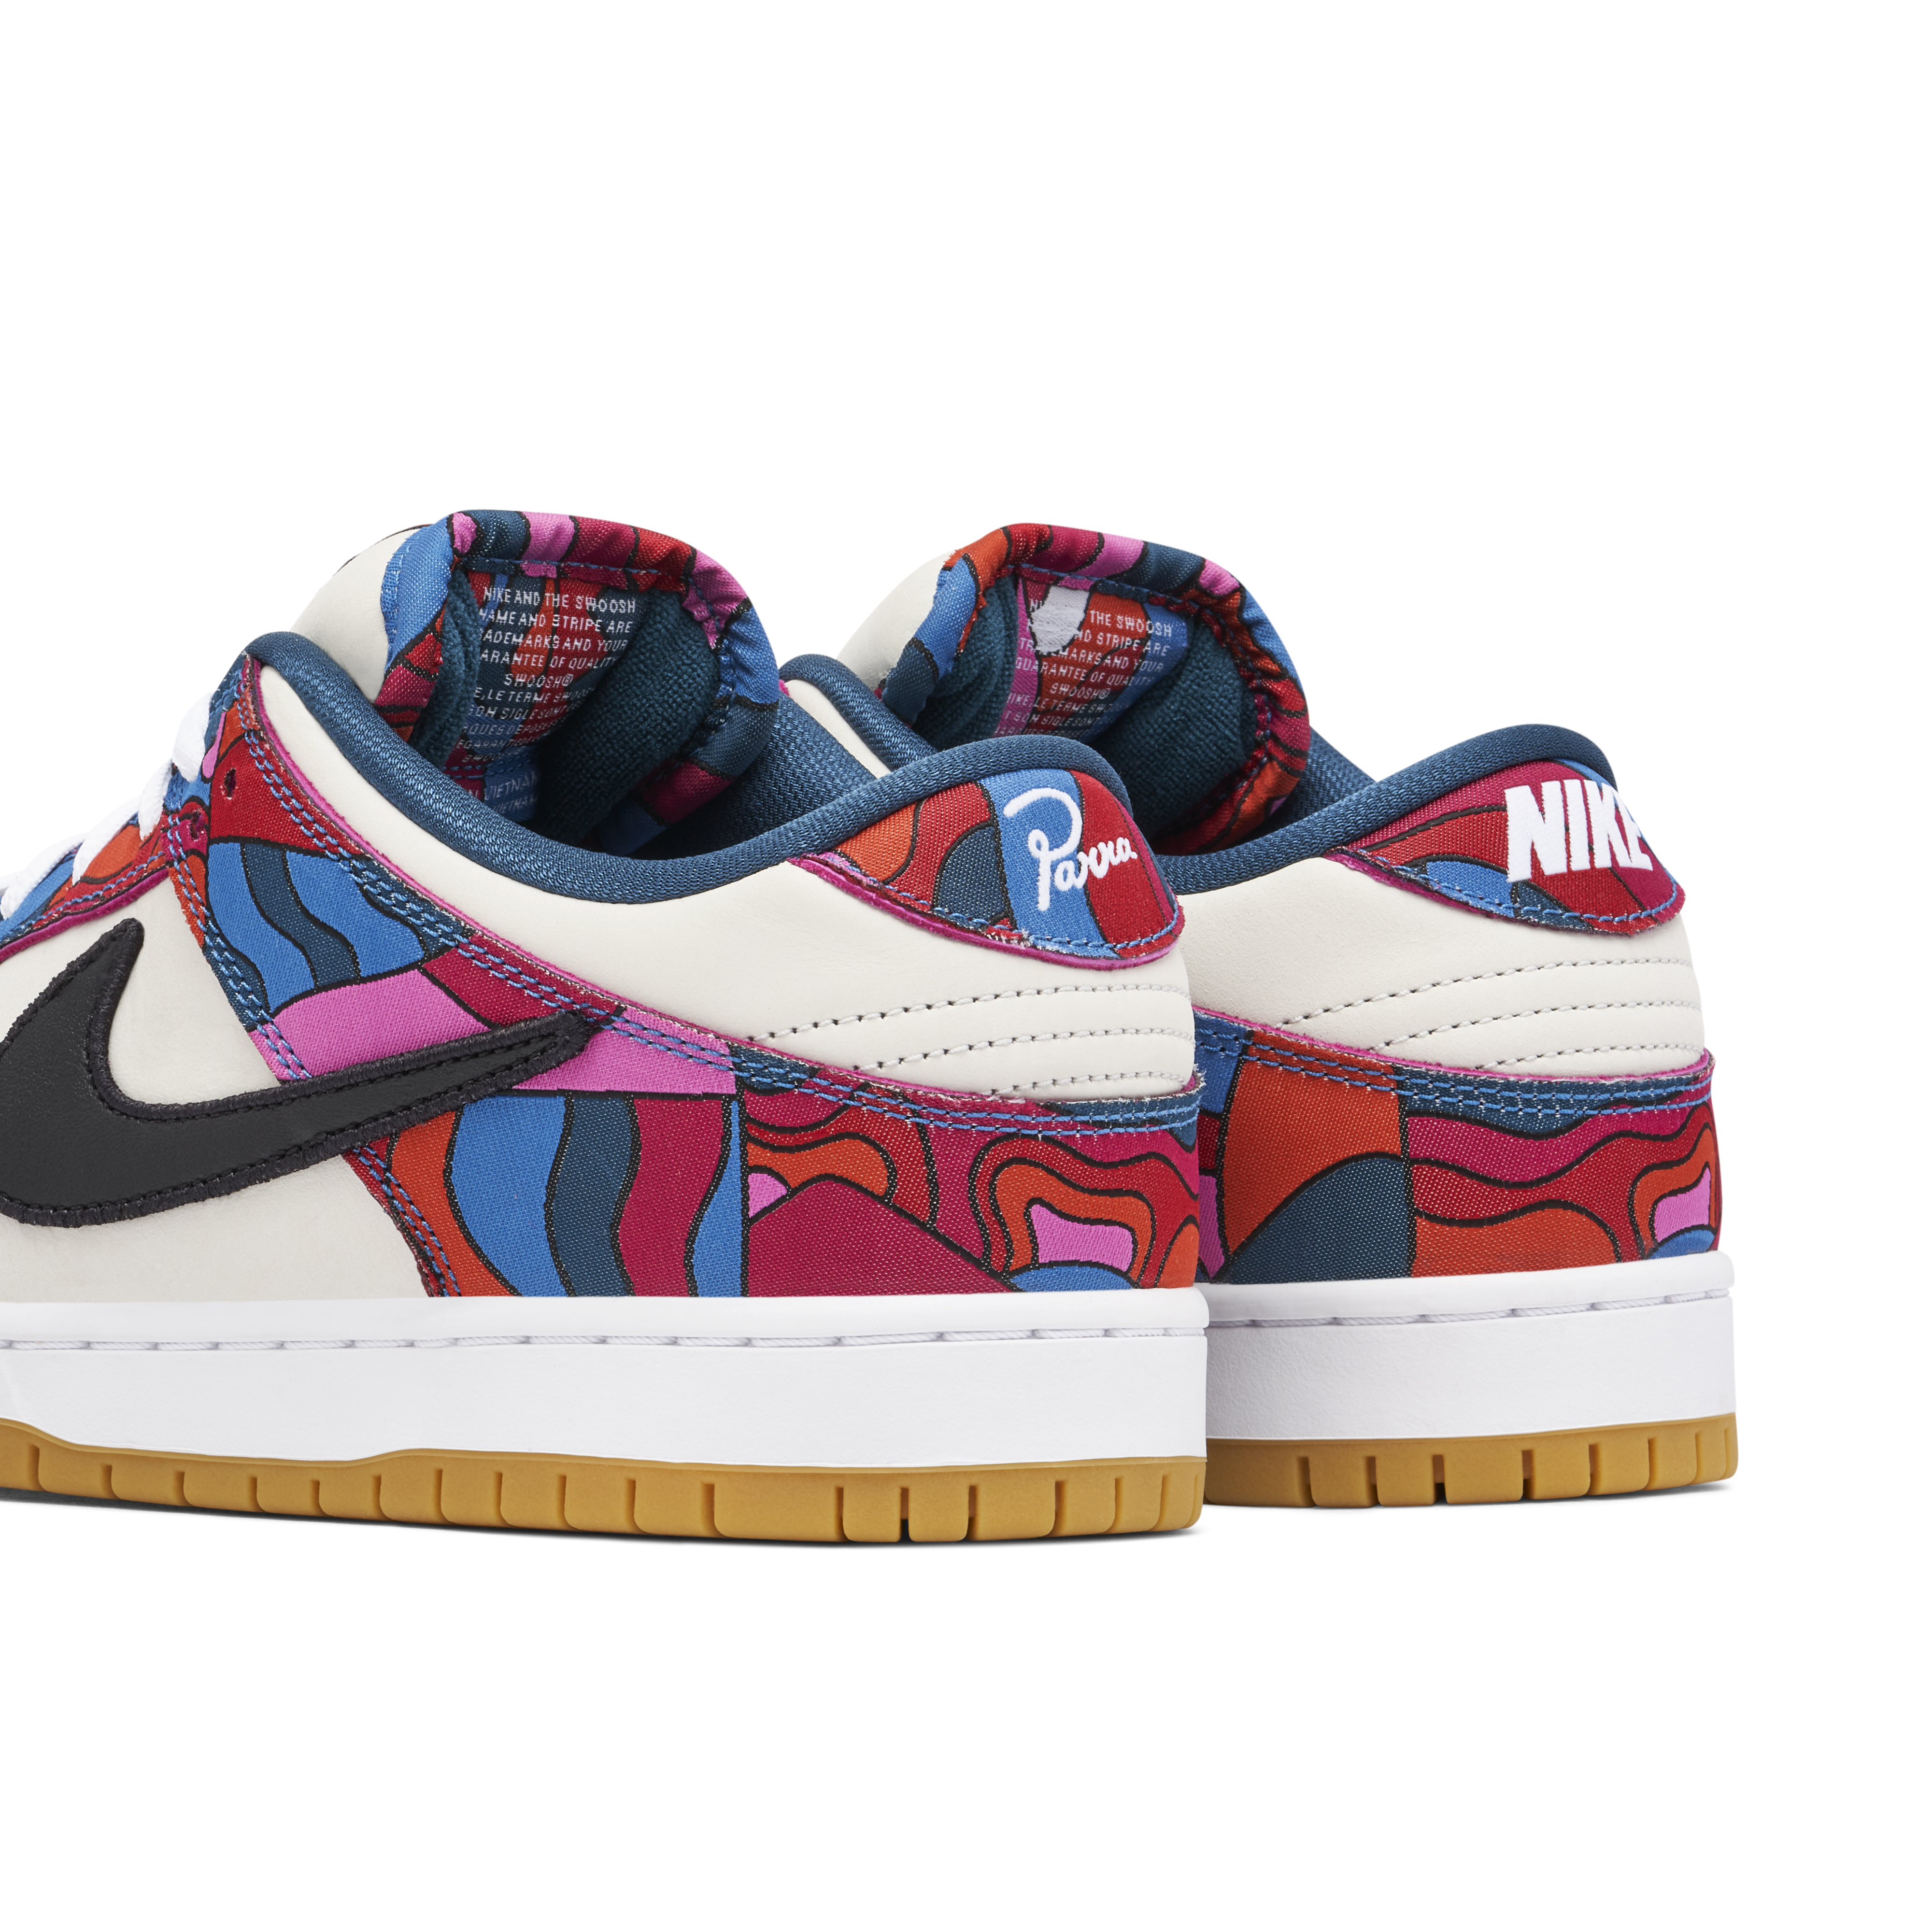 Nike Dunk Low Pro SB x Parra Abstract Art | DH7695-600 | Laced